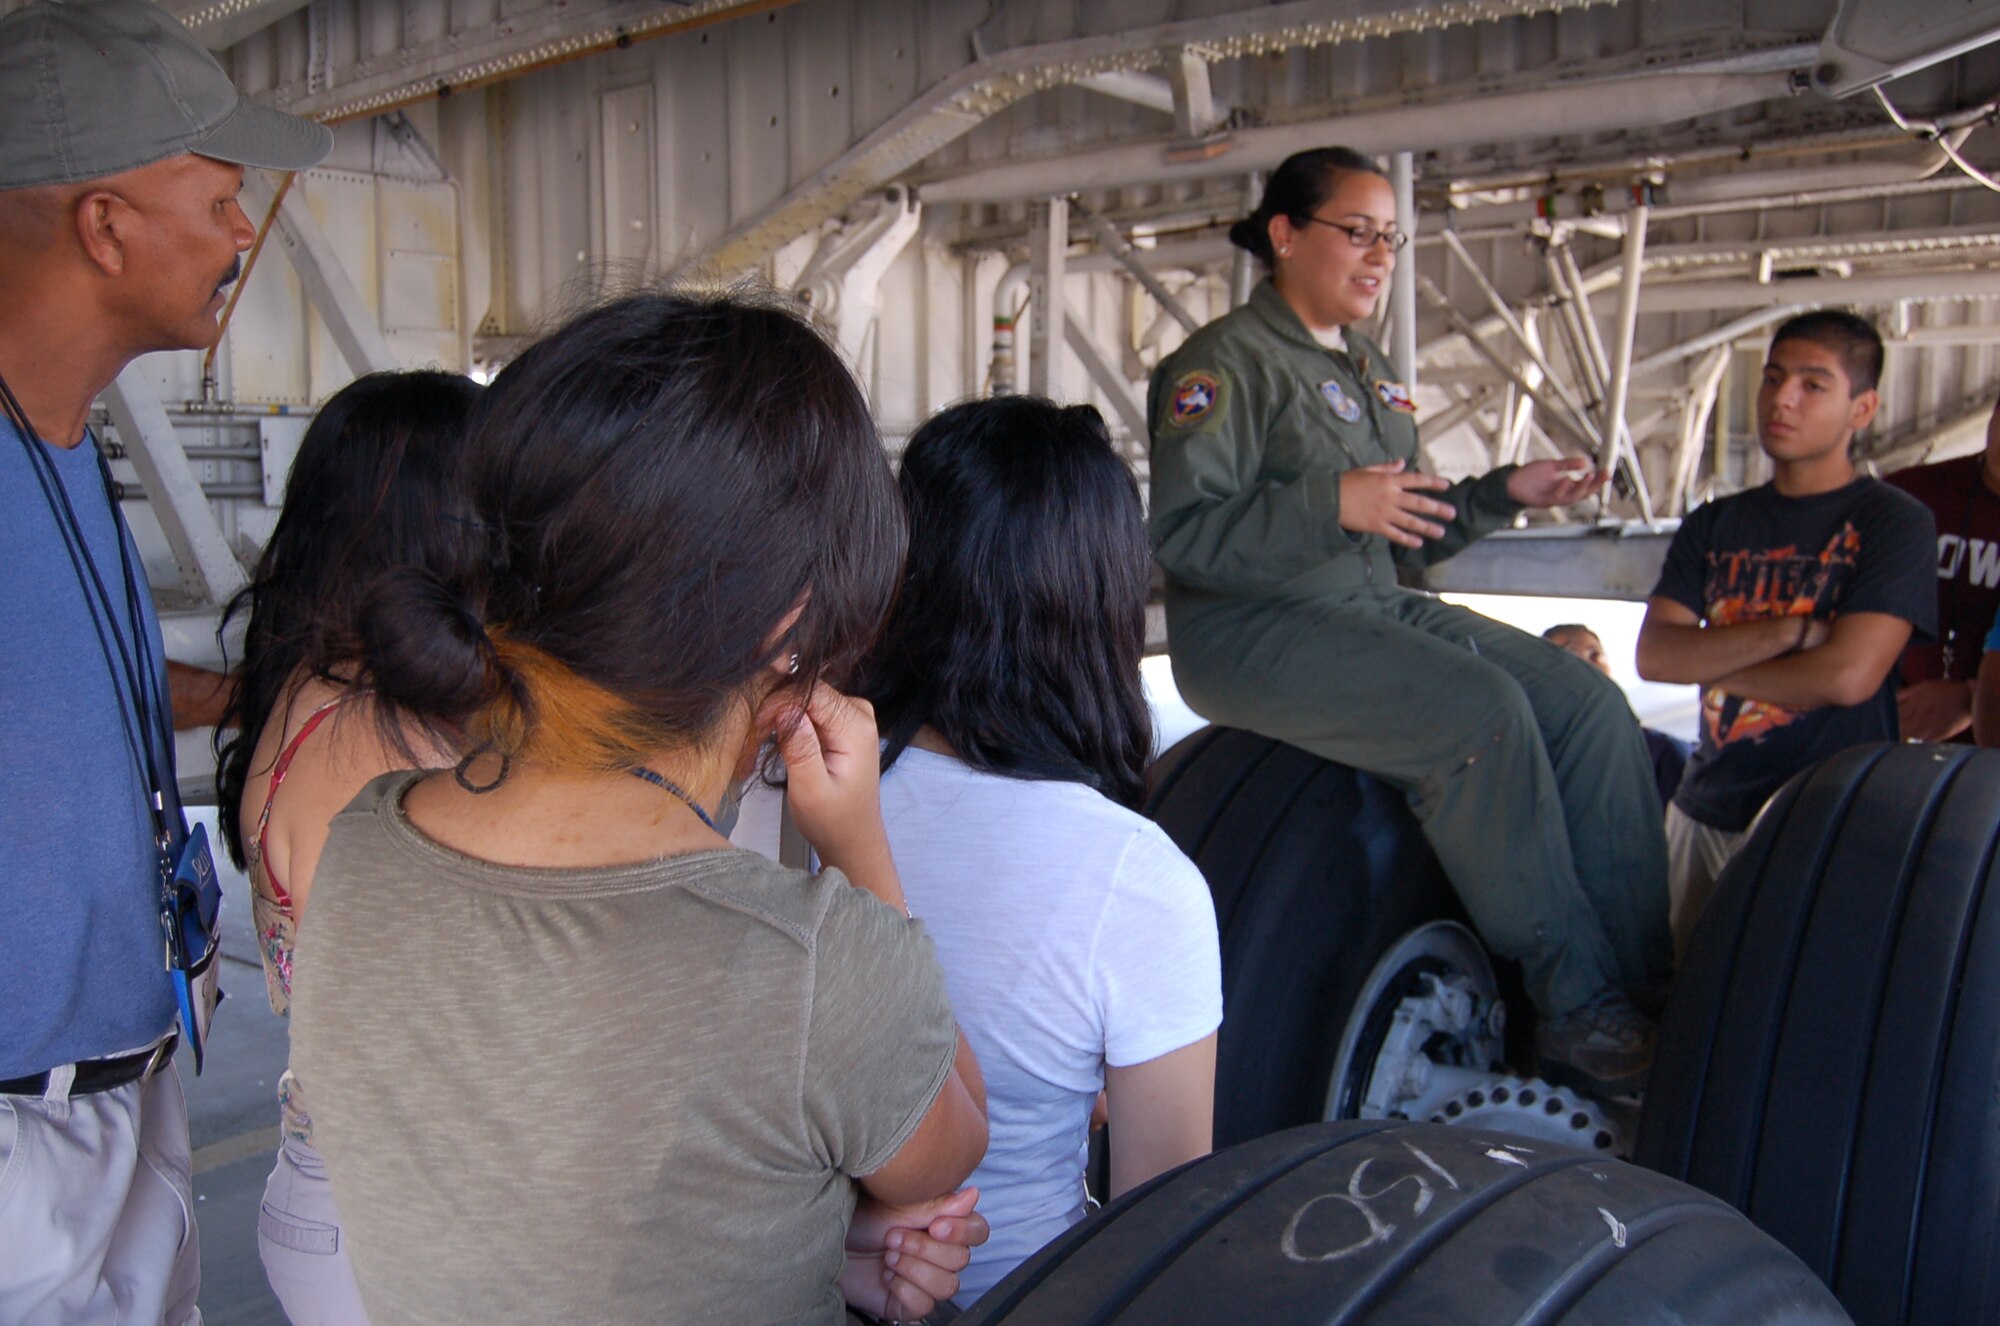 Airman First Class Jaqlynn De La Rosa, a 68th Airlift Squadron loadmaster, explains the C-5A Galaxy's landing gear to ACE Aviation Camp students June 28, 2012 at Joint Base San Antonio-Lackland, Texas.  The 68th AS is one of three flying squadrons attached to the 433rd Airlift Wing. The ACE program helps students develop an awareness of the role of aviation inhuman history, encourages exploration of career opportunities in aviation, introduces the role of government relating to aviation, and develops an understanding of socio-economic benefits of aviation in our communities and daily lives. 